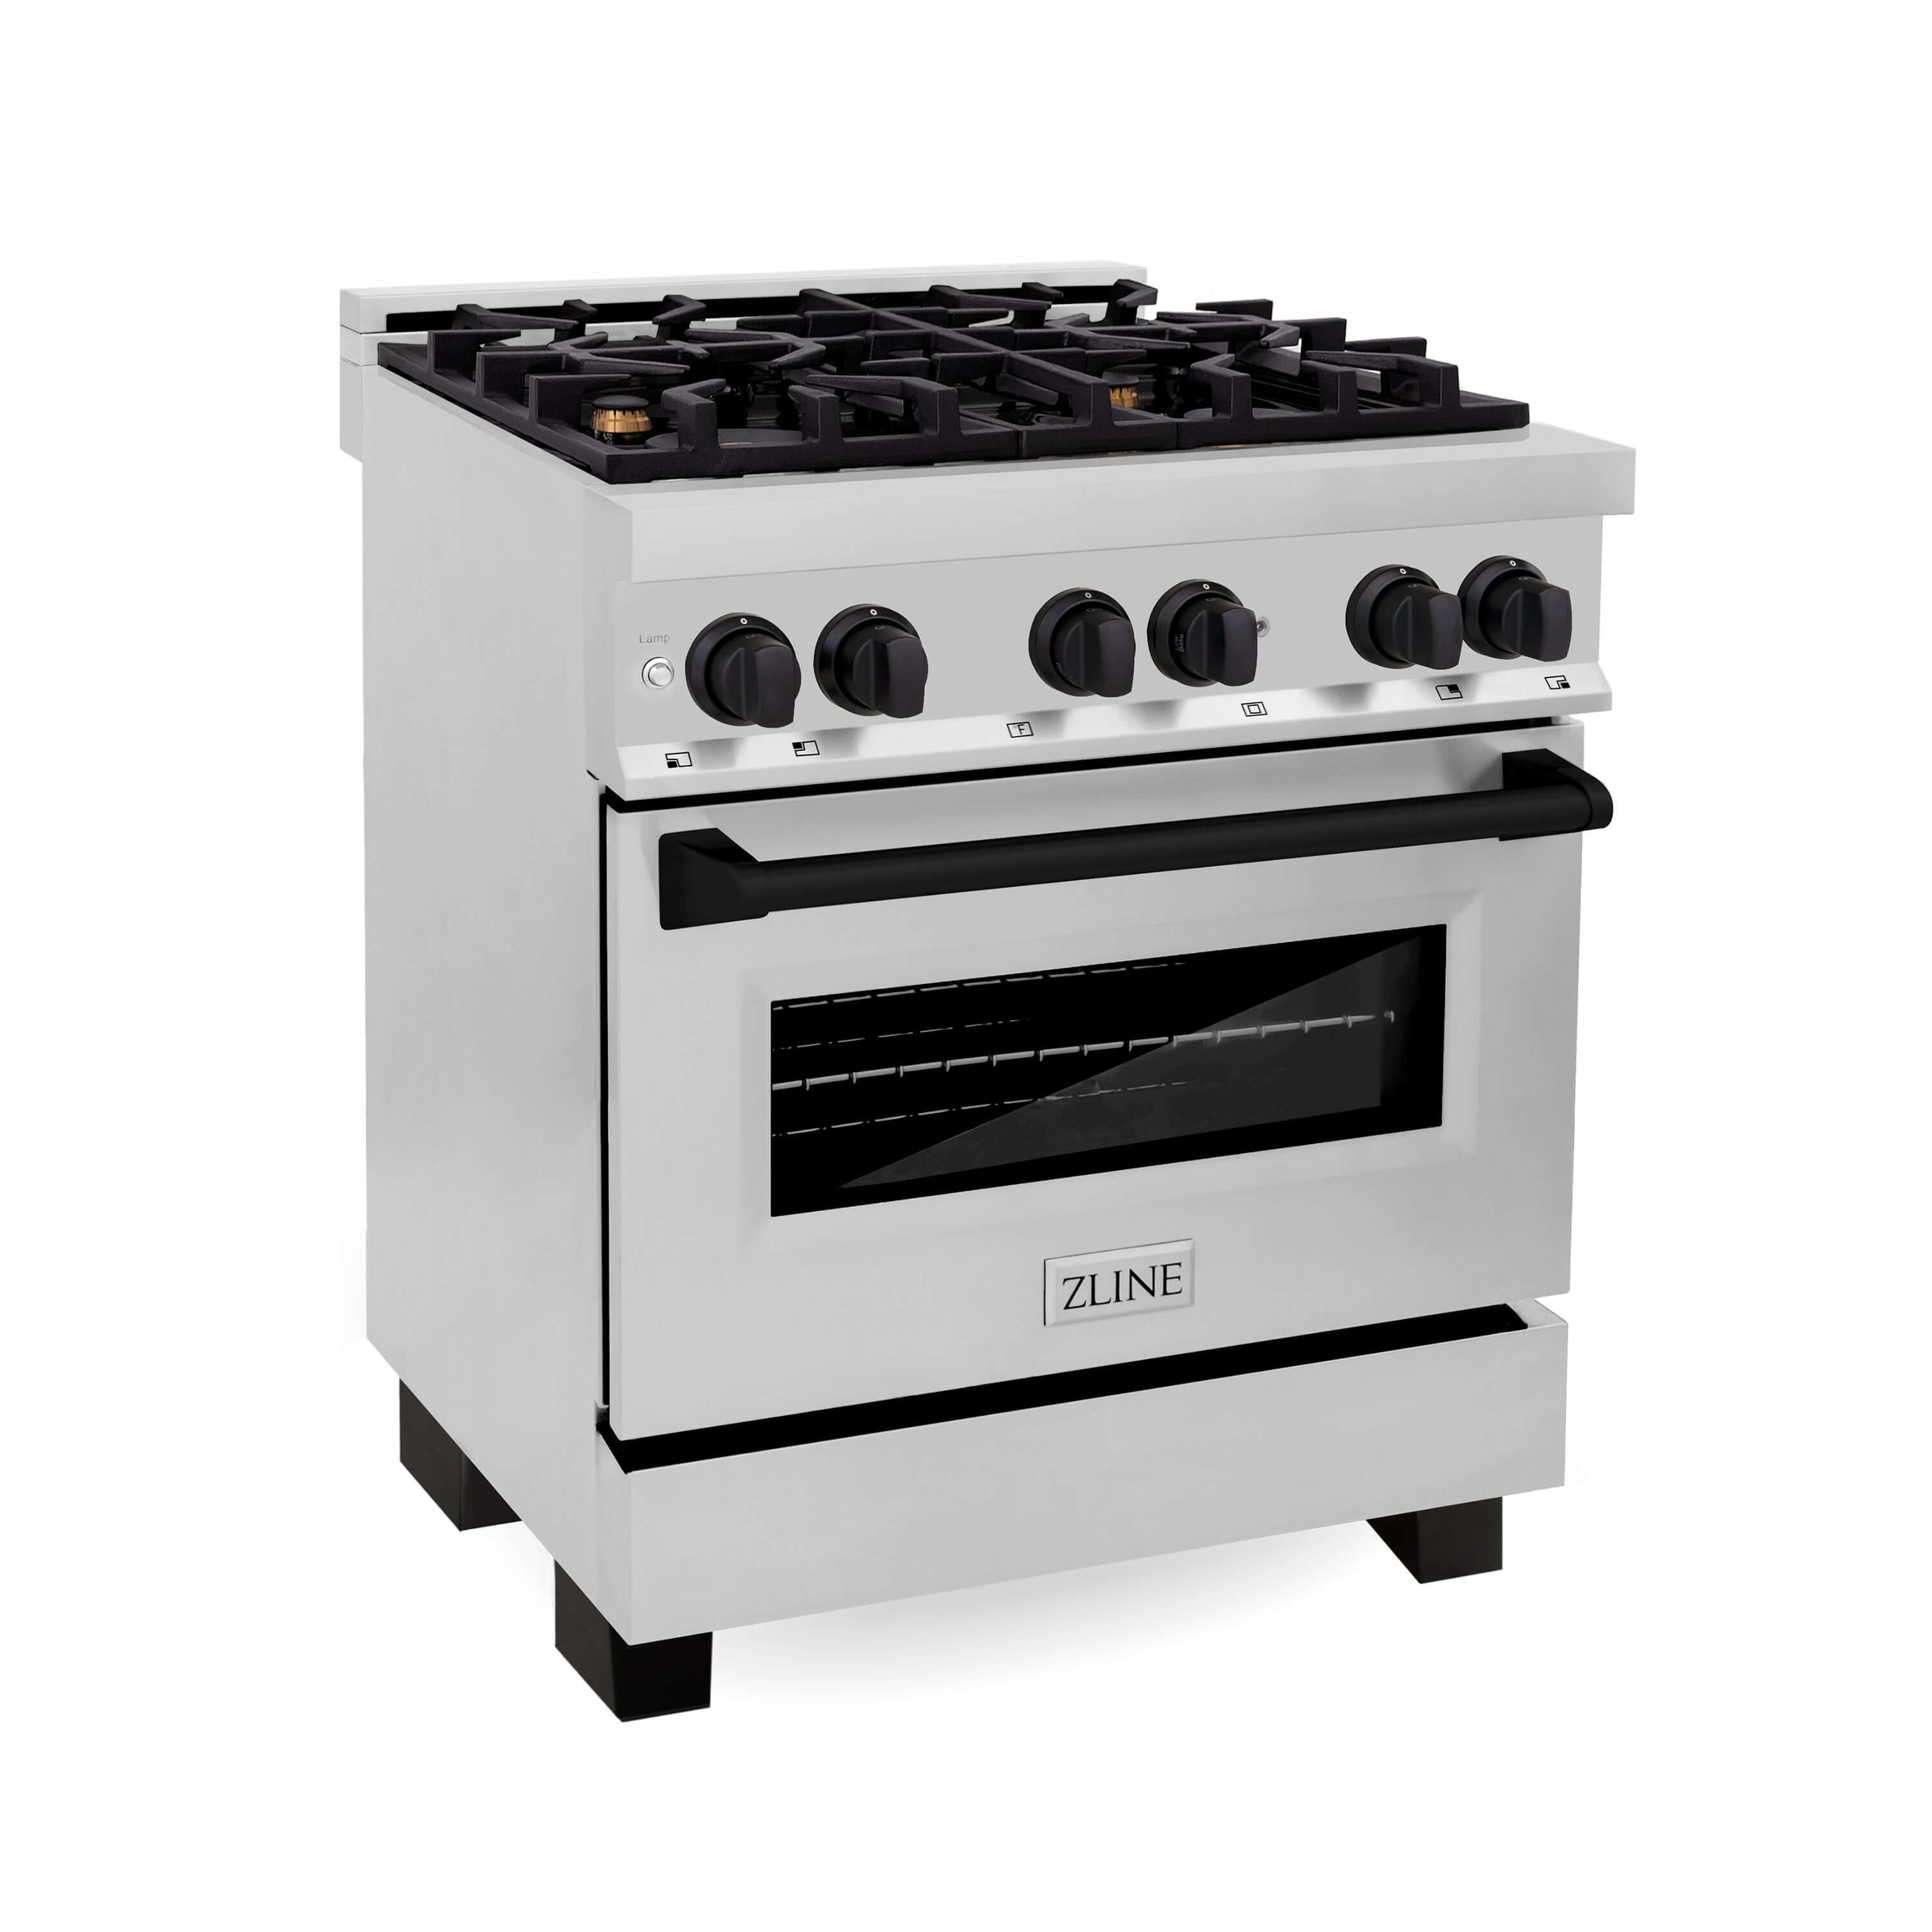 ZLINE Autograph Edition 30 in. 4.0 cu. ft. Dual Fuel Range with Gas Stove and Electric Oven in Stainless Steel with Matte Black Accents (RAZ-30) Included in Kitchen Package